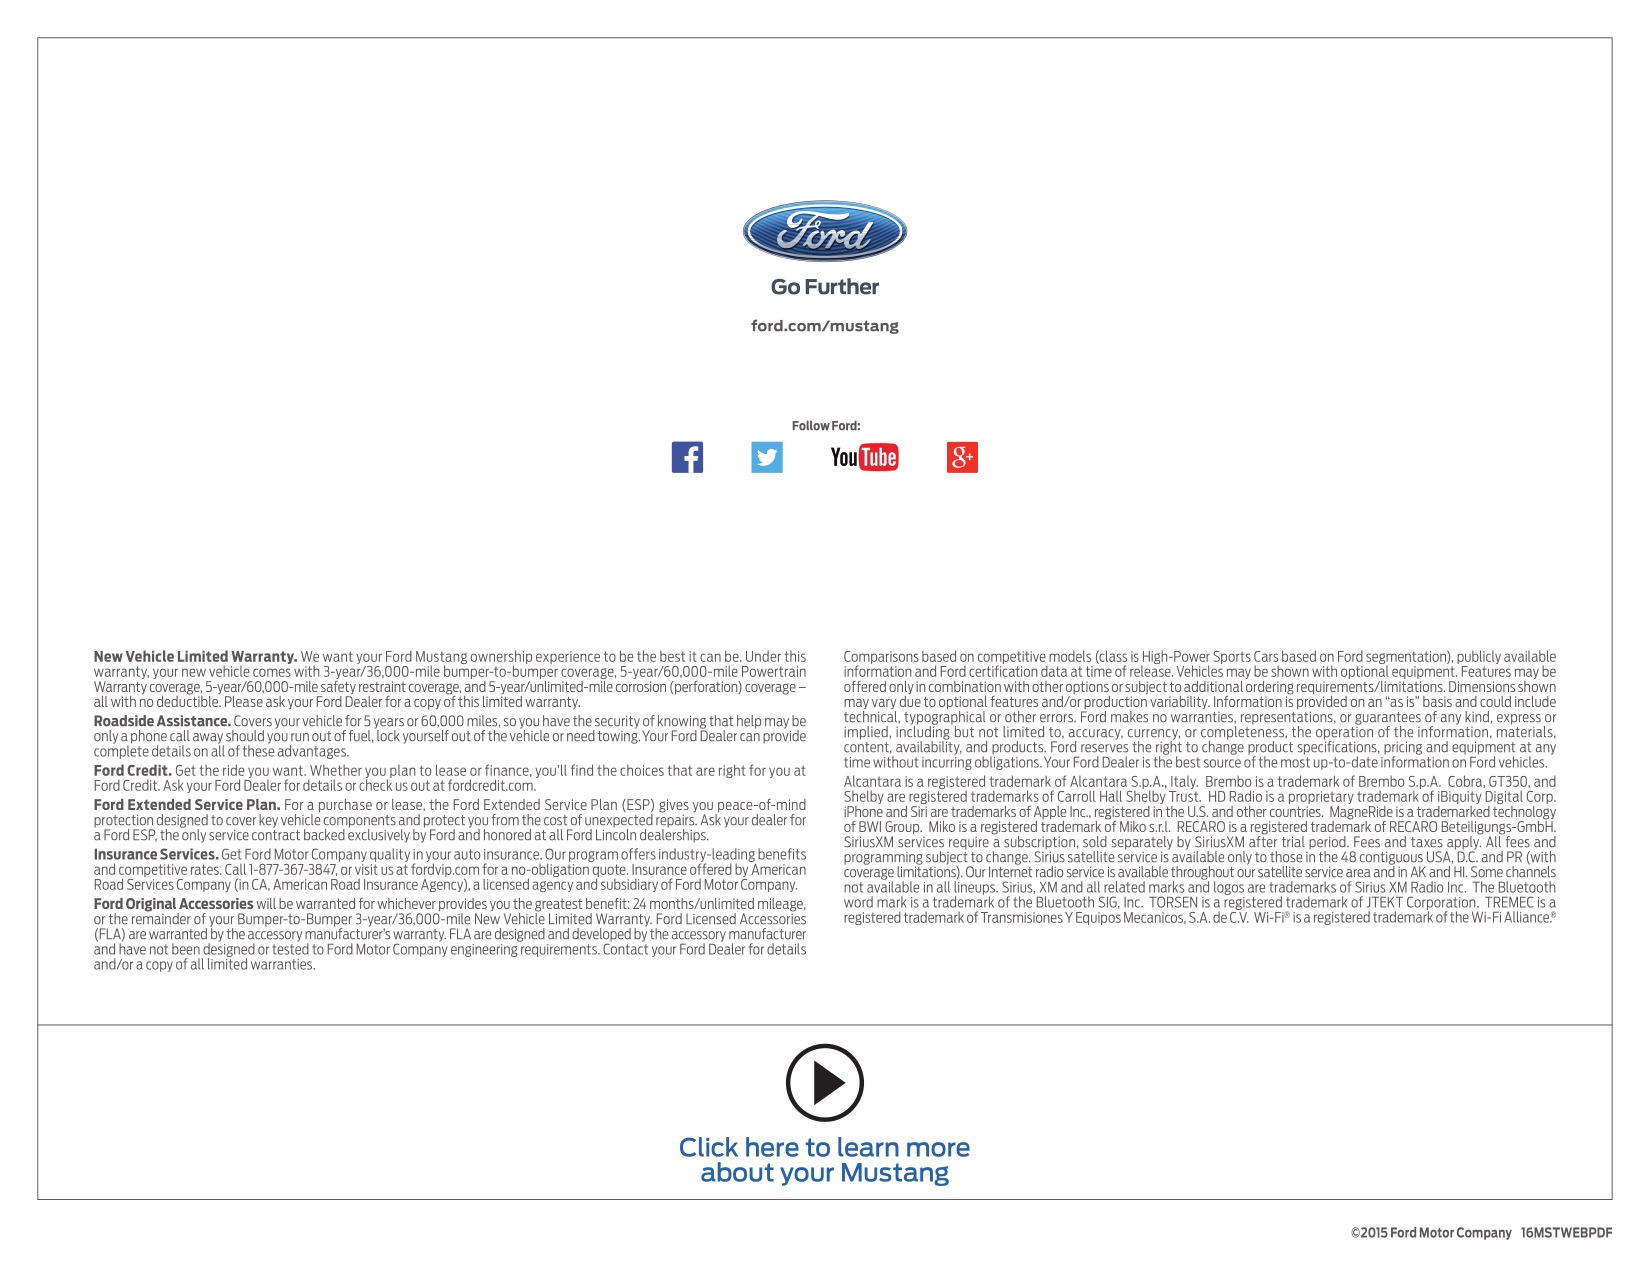 2016 Ford Mustang Brochure Page 14